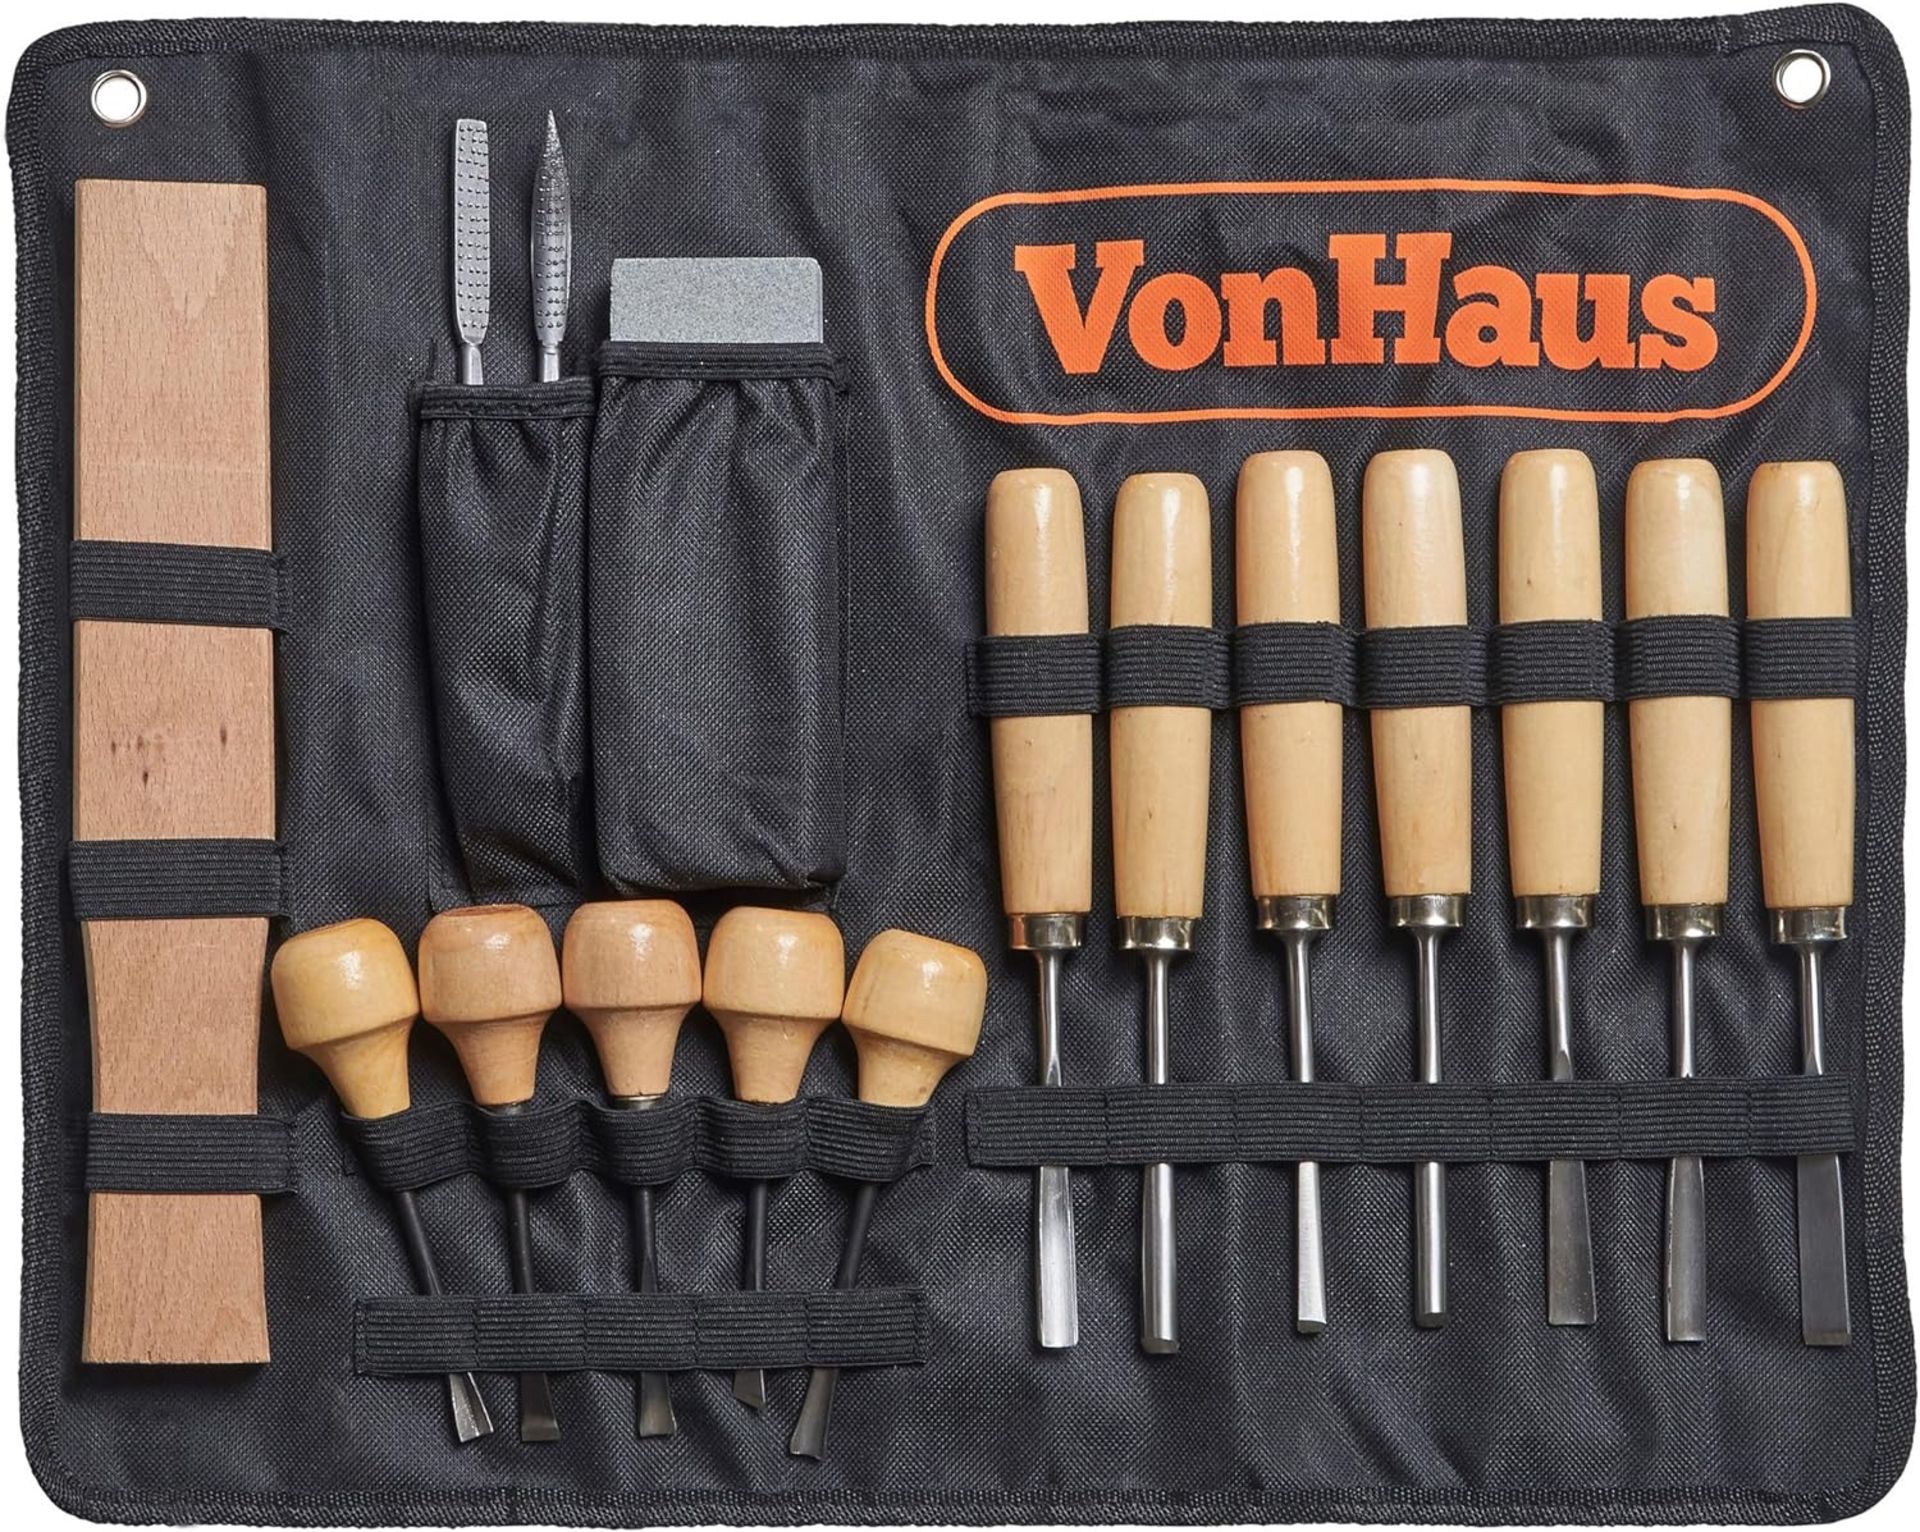 20 X BRAND NEW 16pc Wood Carving Tool Set with Carving Tools Including Files Sharpening Stone &